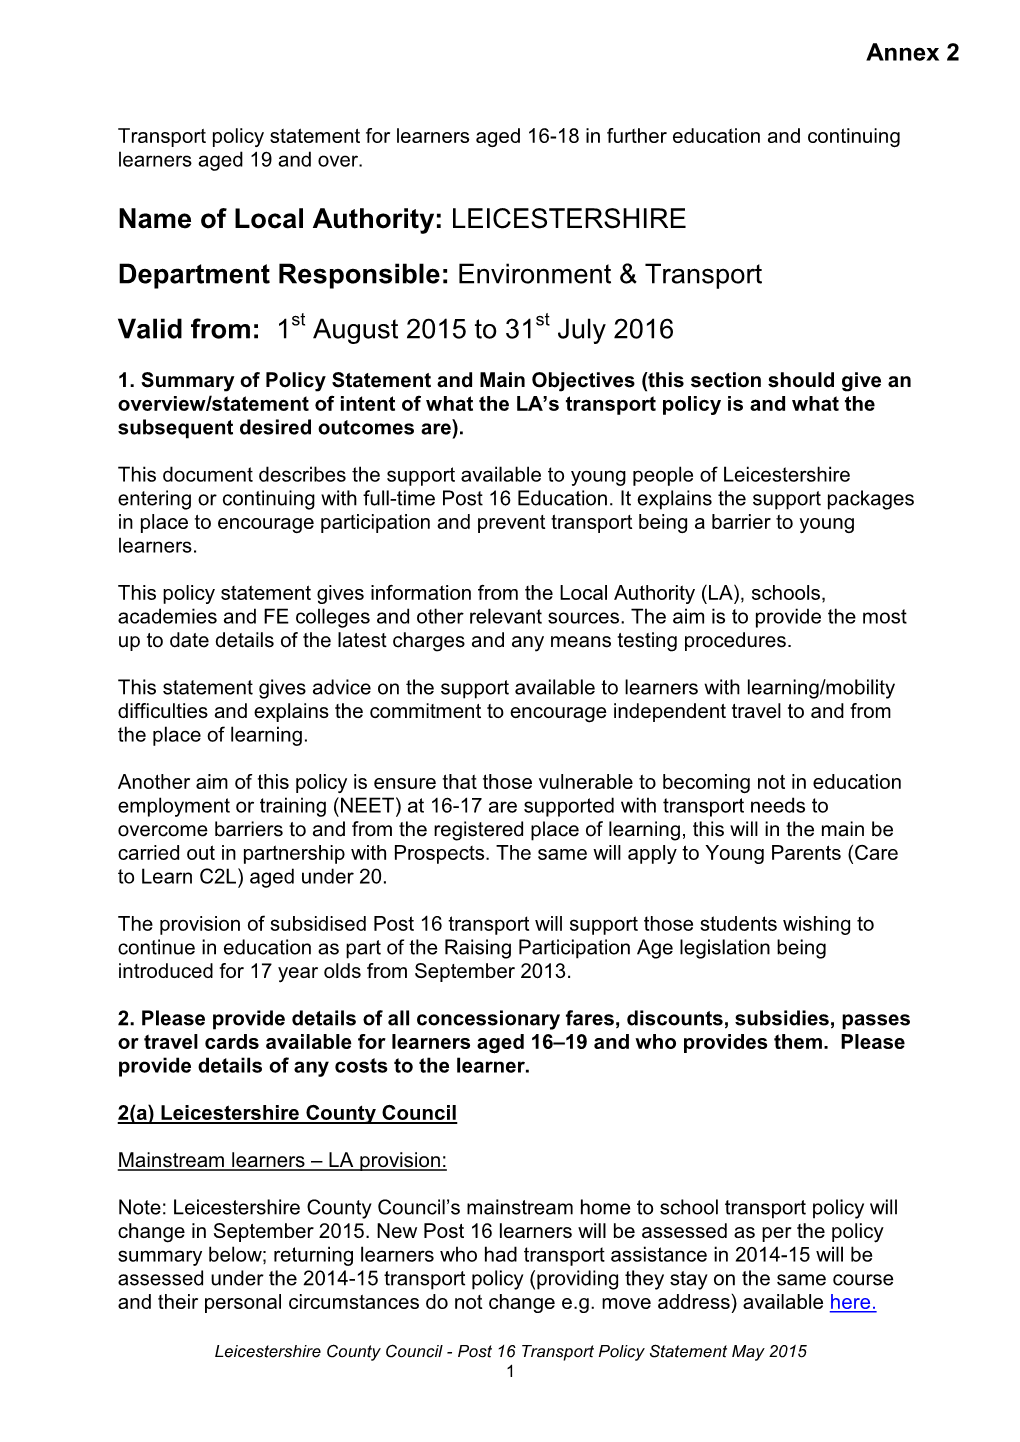 Post 16 Transport Policy Statement 2015